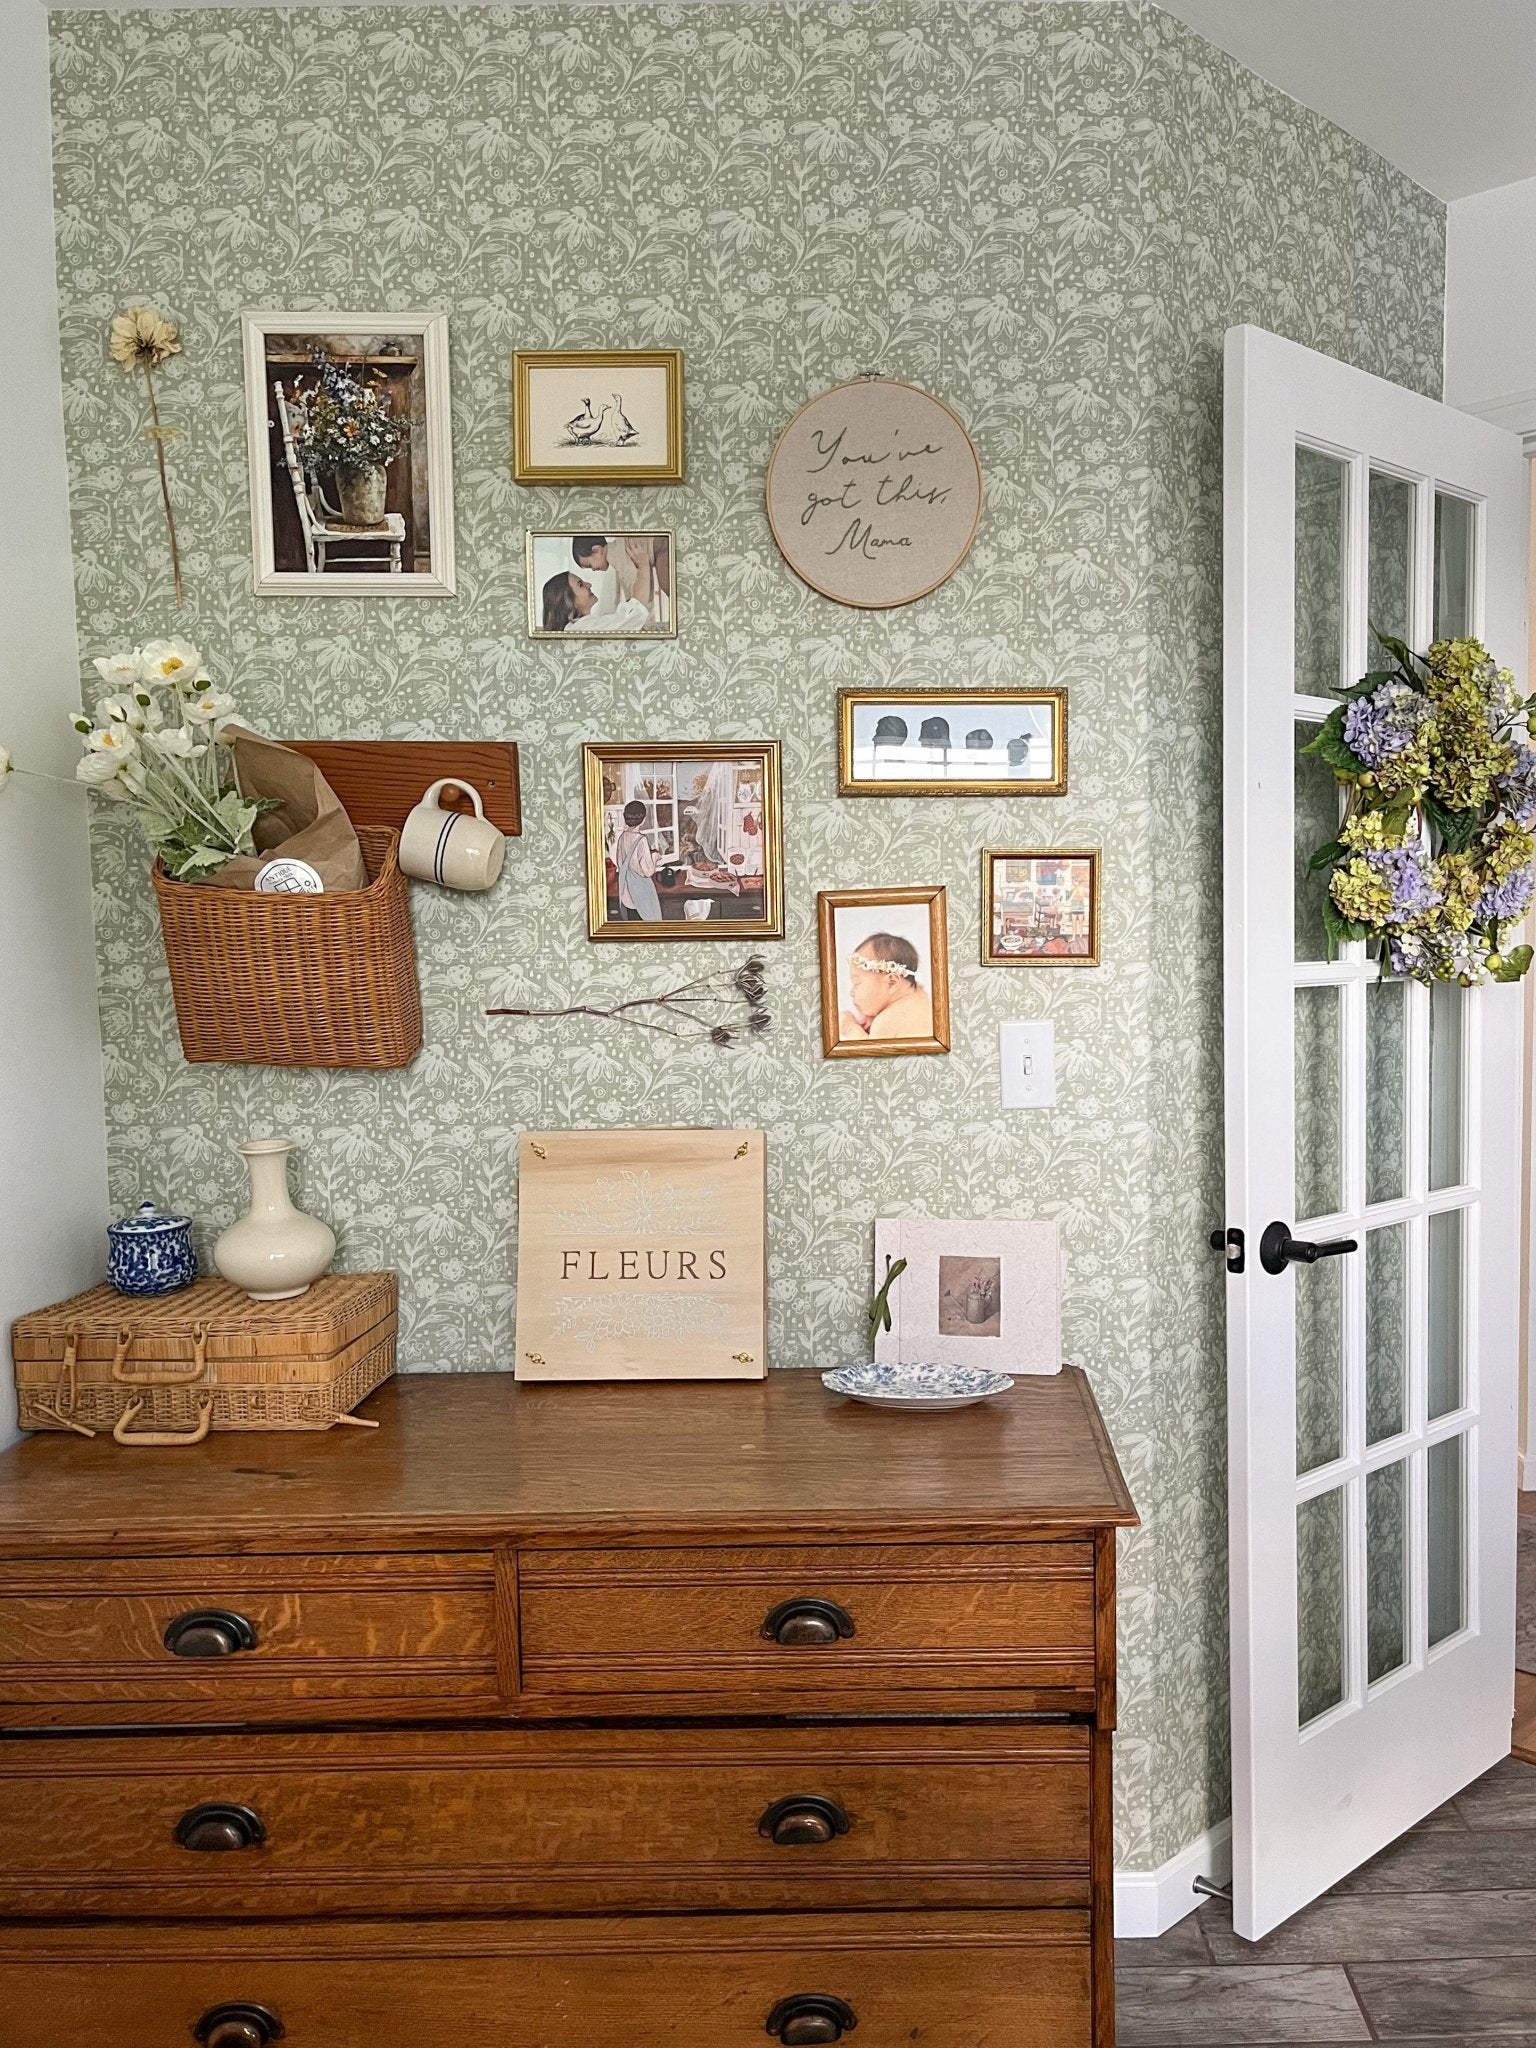 Office wall with rustic decor and sage green wallpaper